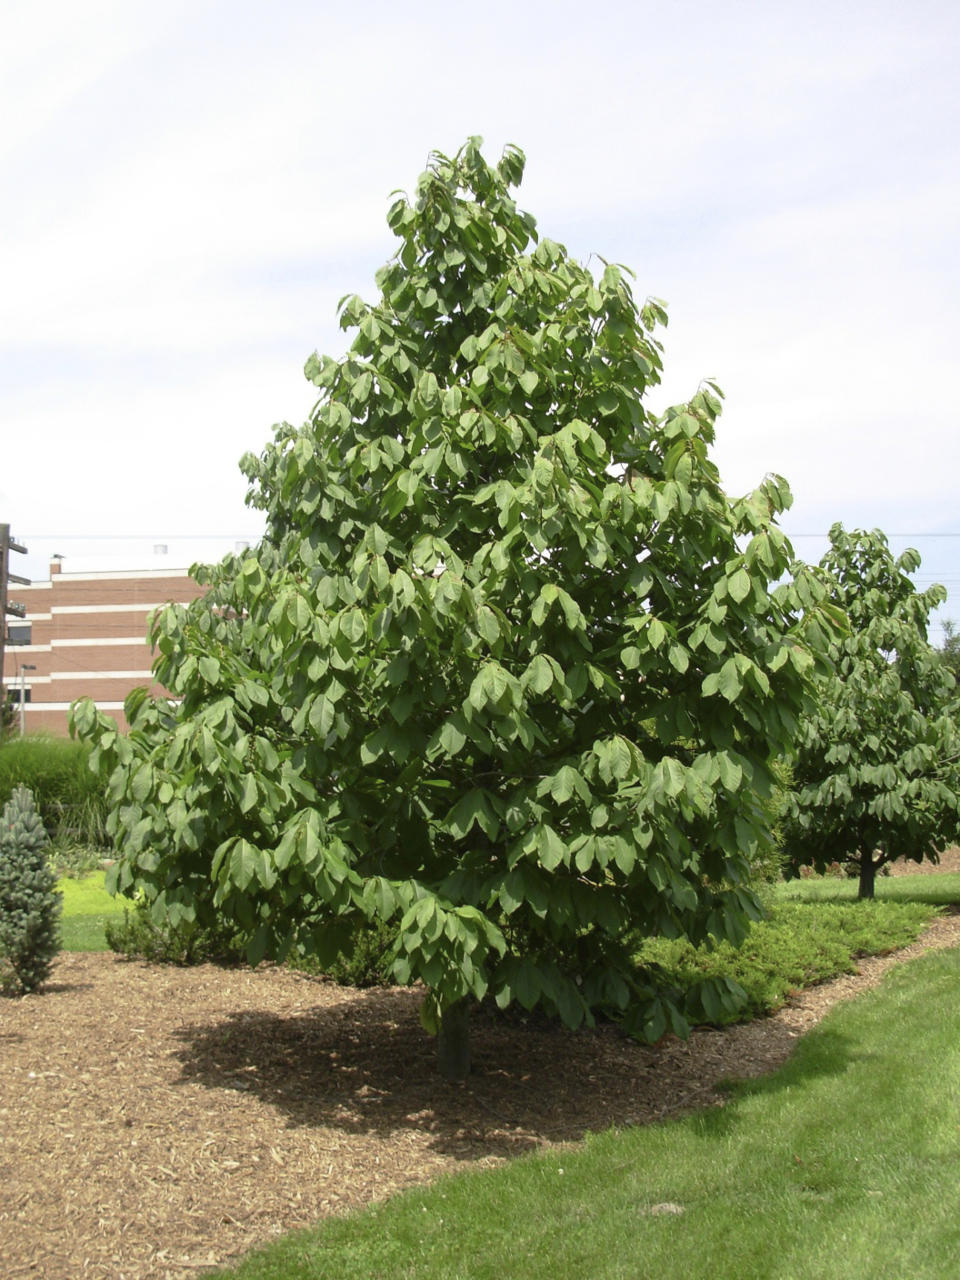 This Aug. 5, 2006, image provided by the Missouri Dept. of Conservation shows a pawpaw tree growing in Missouri. The underused North American native trees produce fruit with creamy interiors that taste similar to bananas. (Missouri Dept. of Conservation via AP)